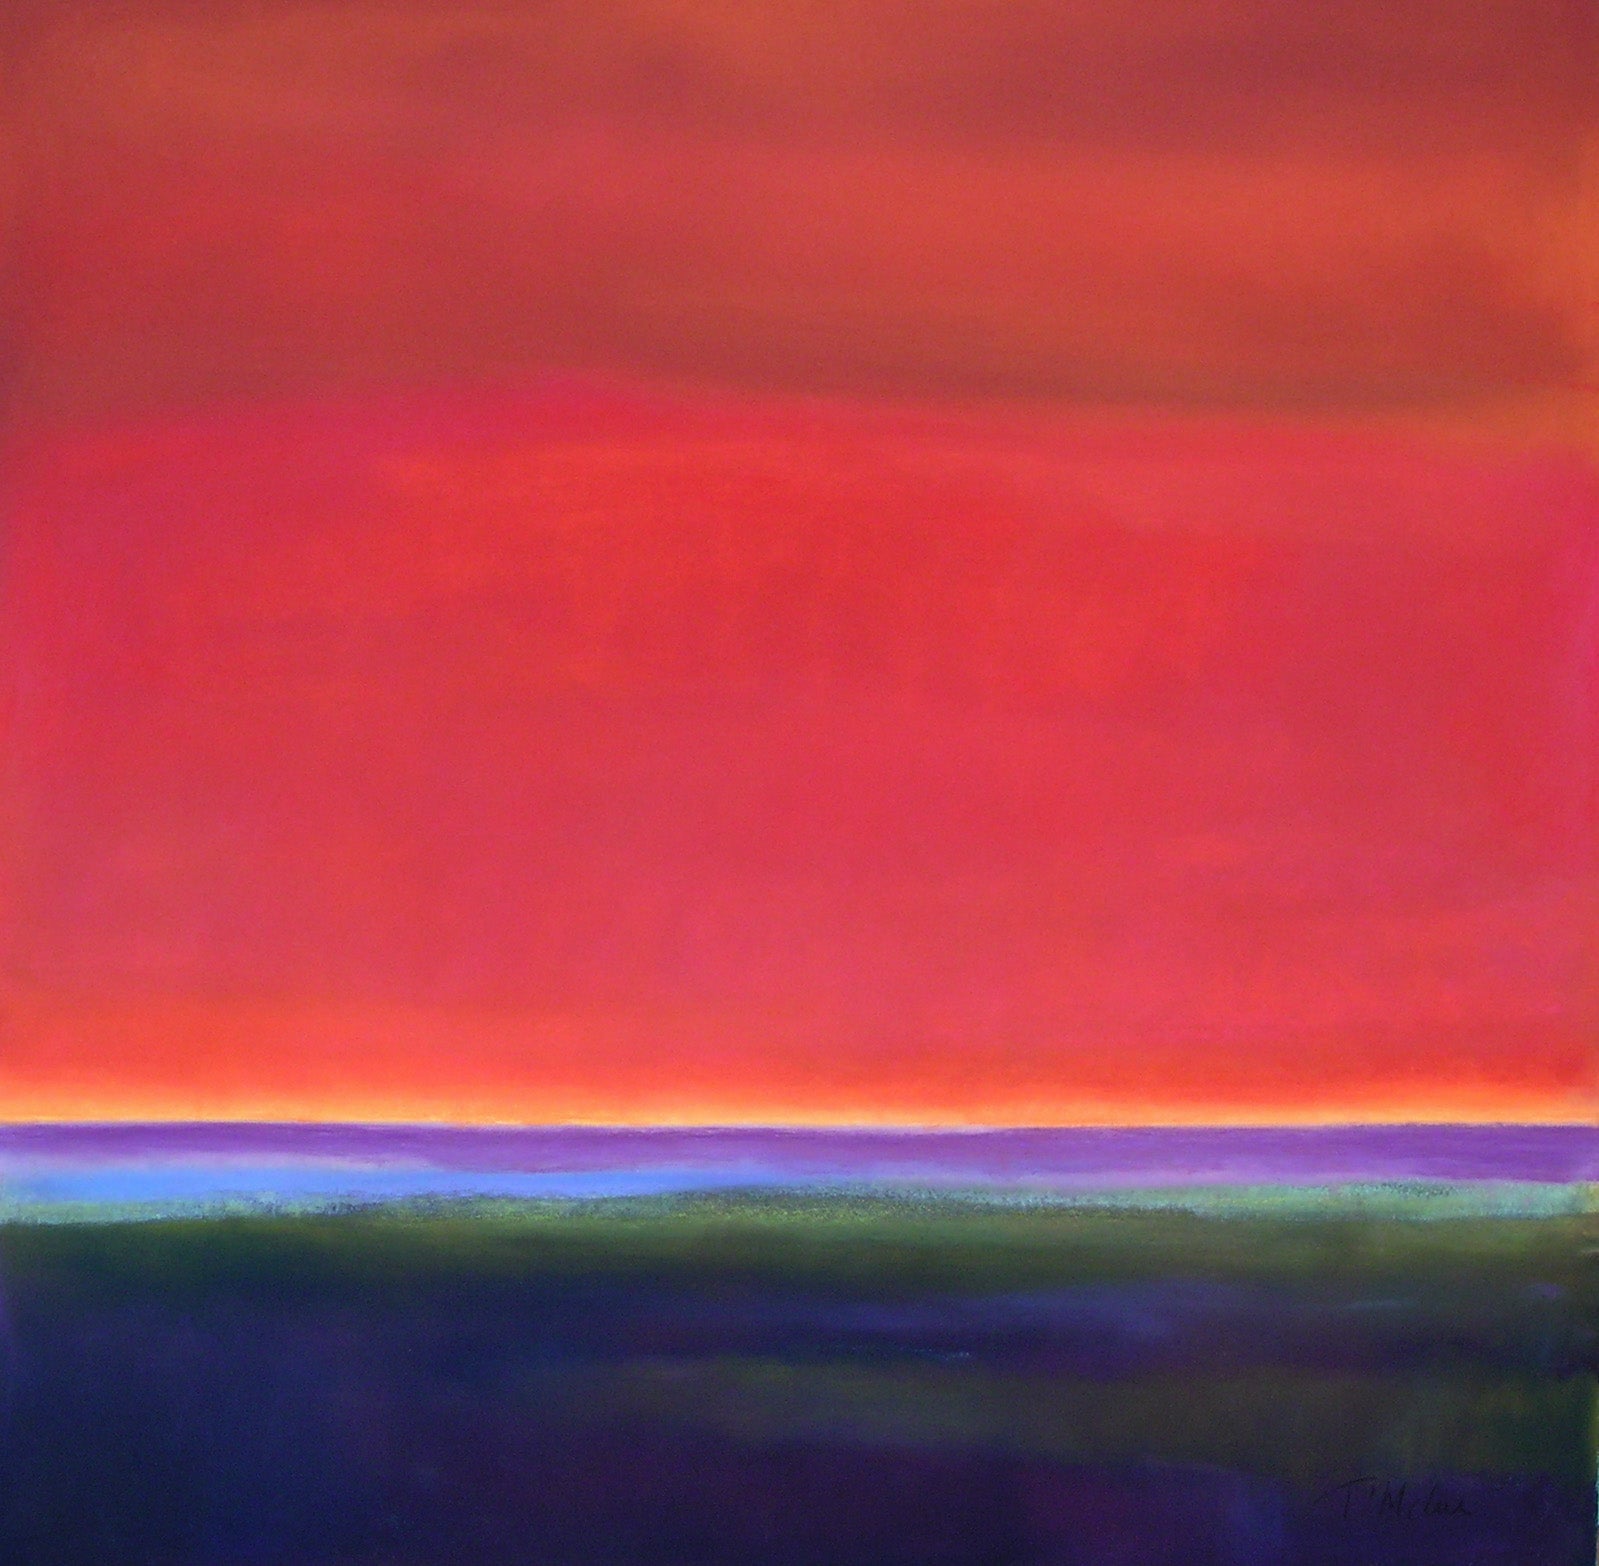 Sky Fire, limited edition giclee